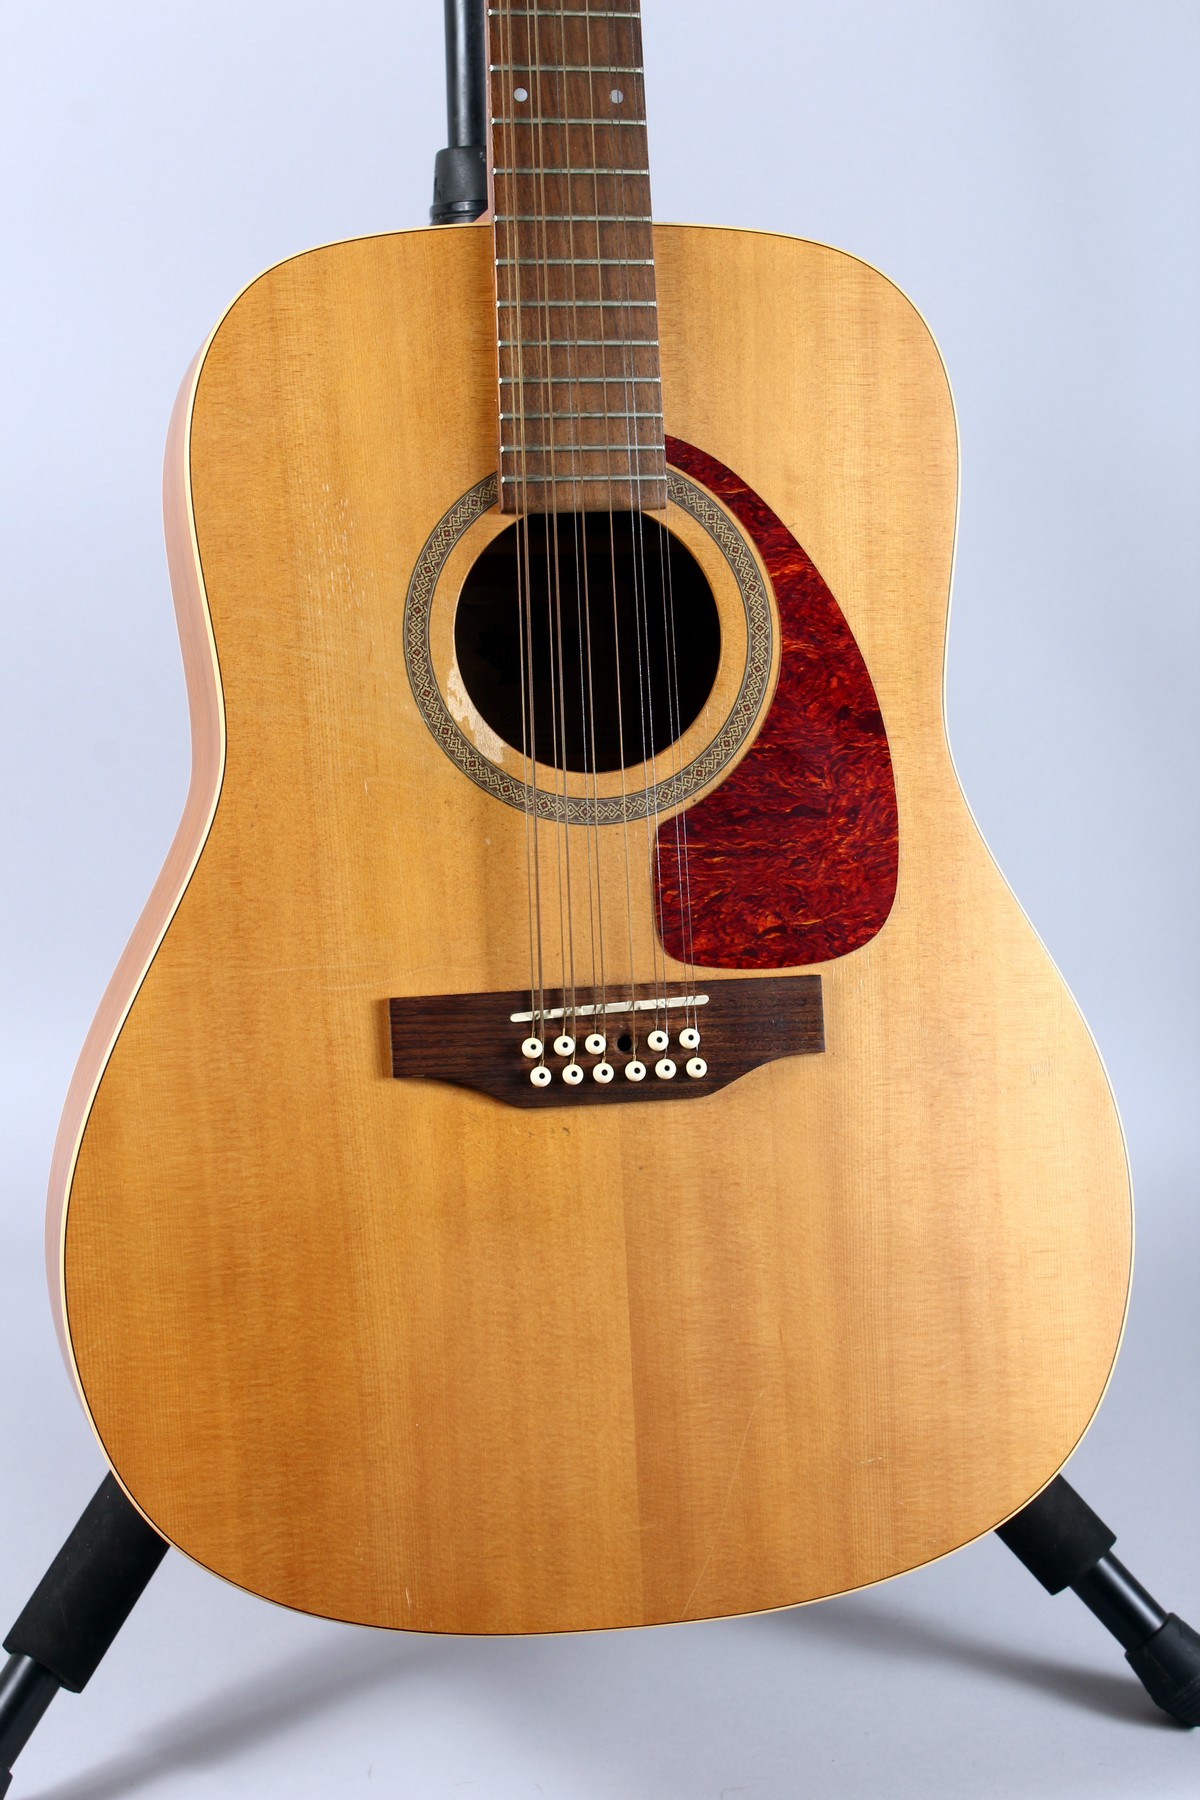 NORMAN B20 - a 12-string acoustic dreadnought guitar handmade in Quebec, Canada. Cherry back and - Image 2 of 27